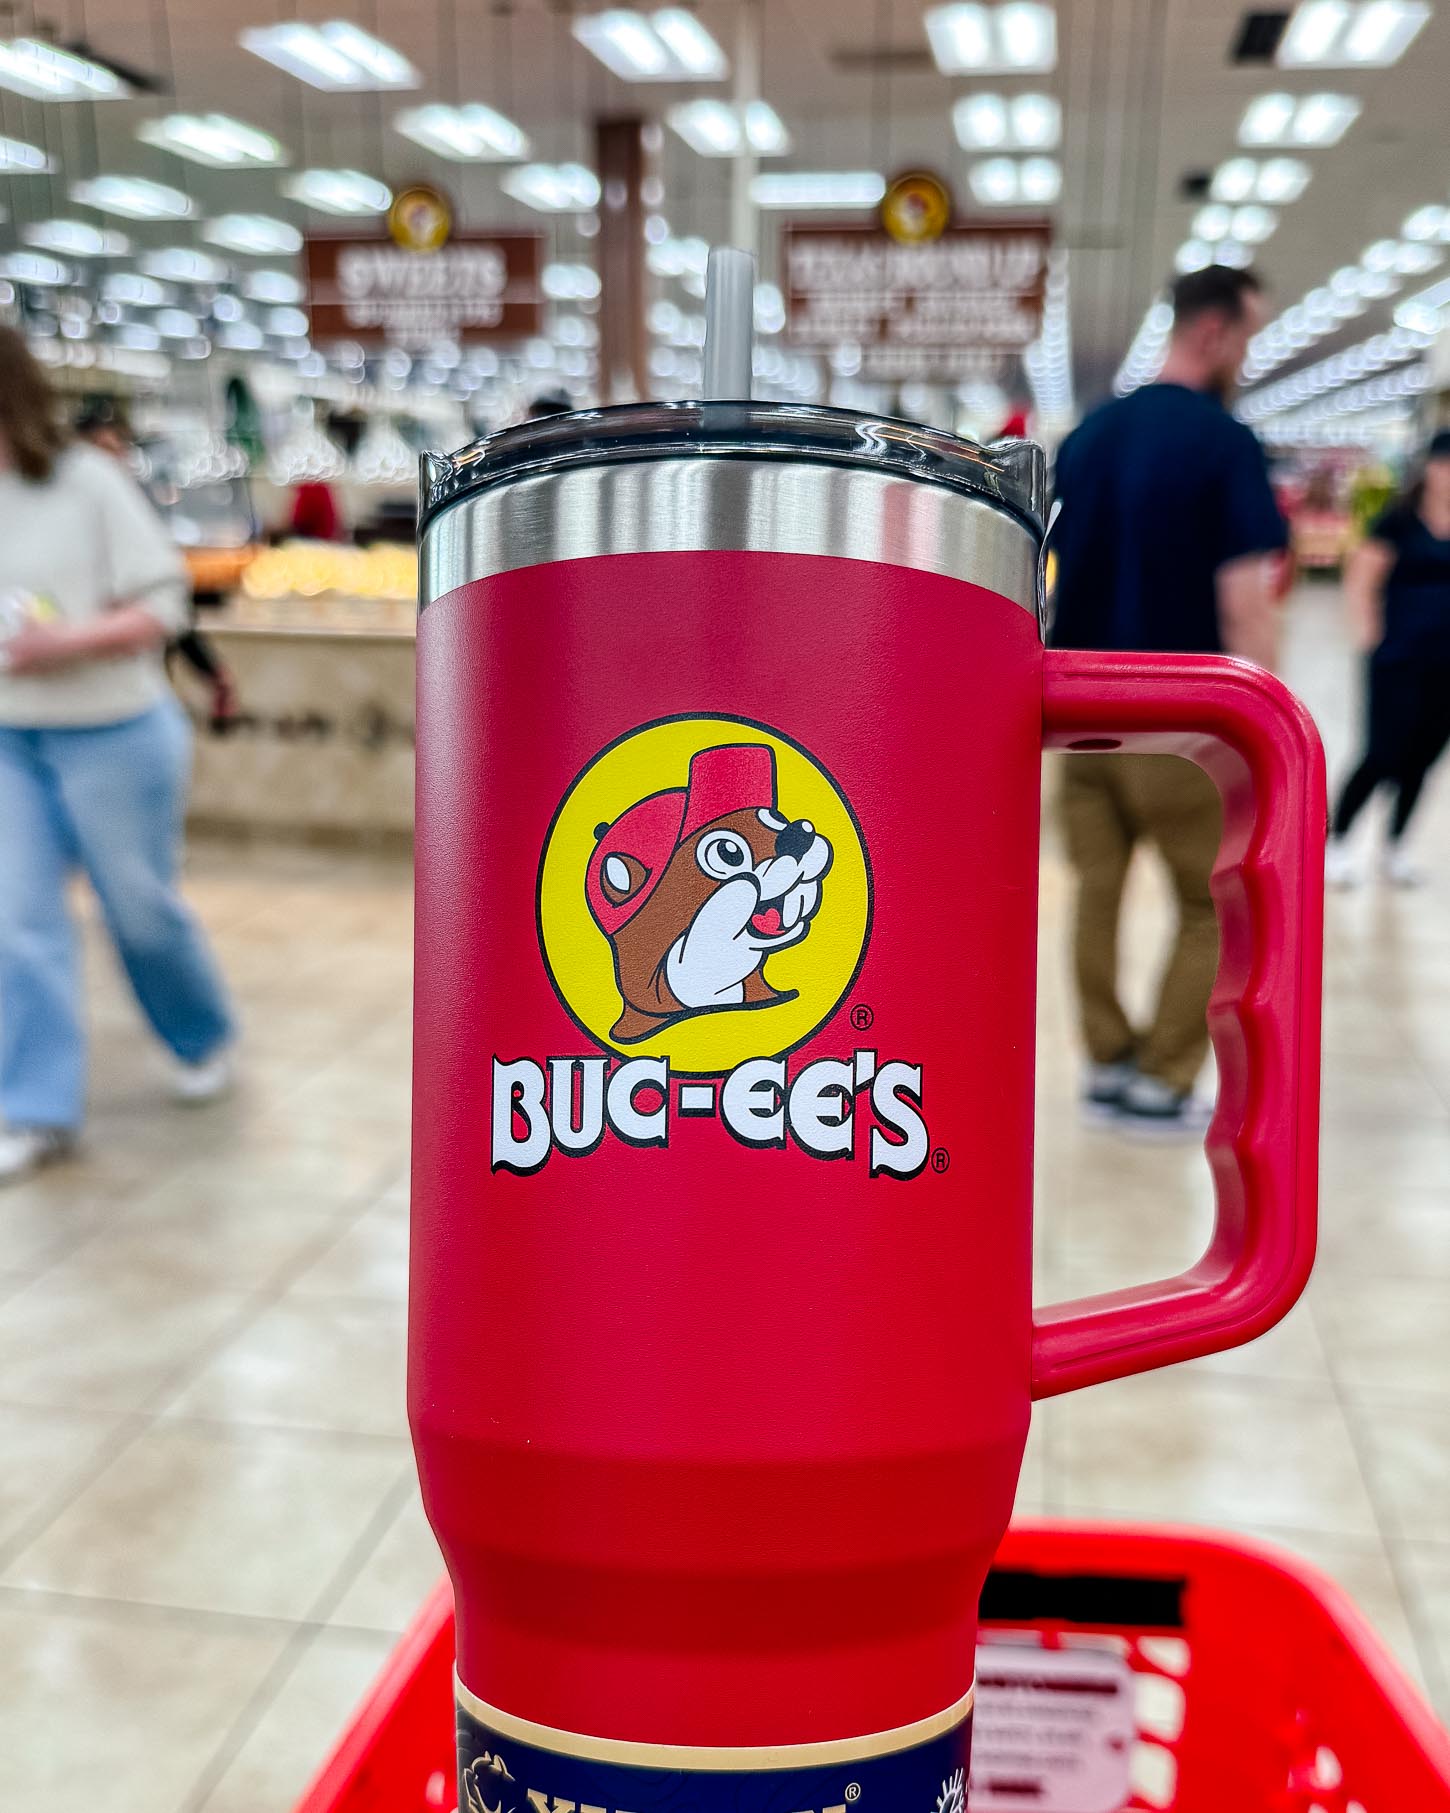 buc-ees review | www.iamafoodblog.com